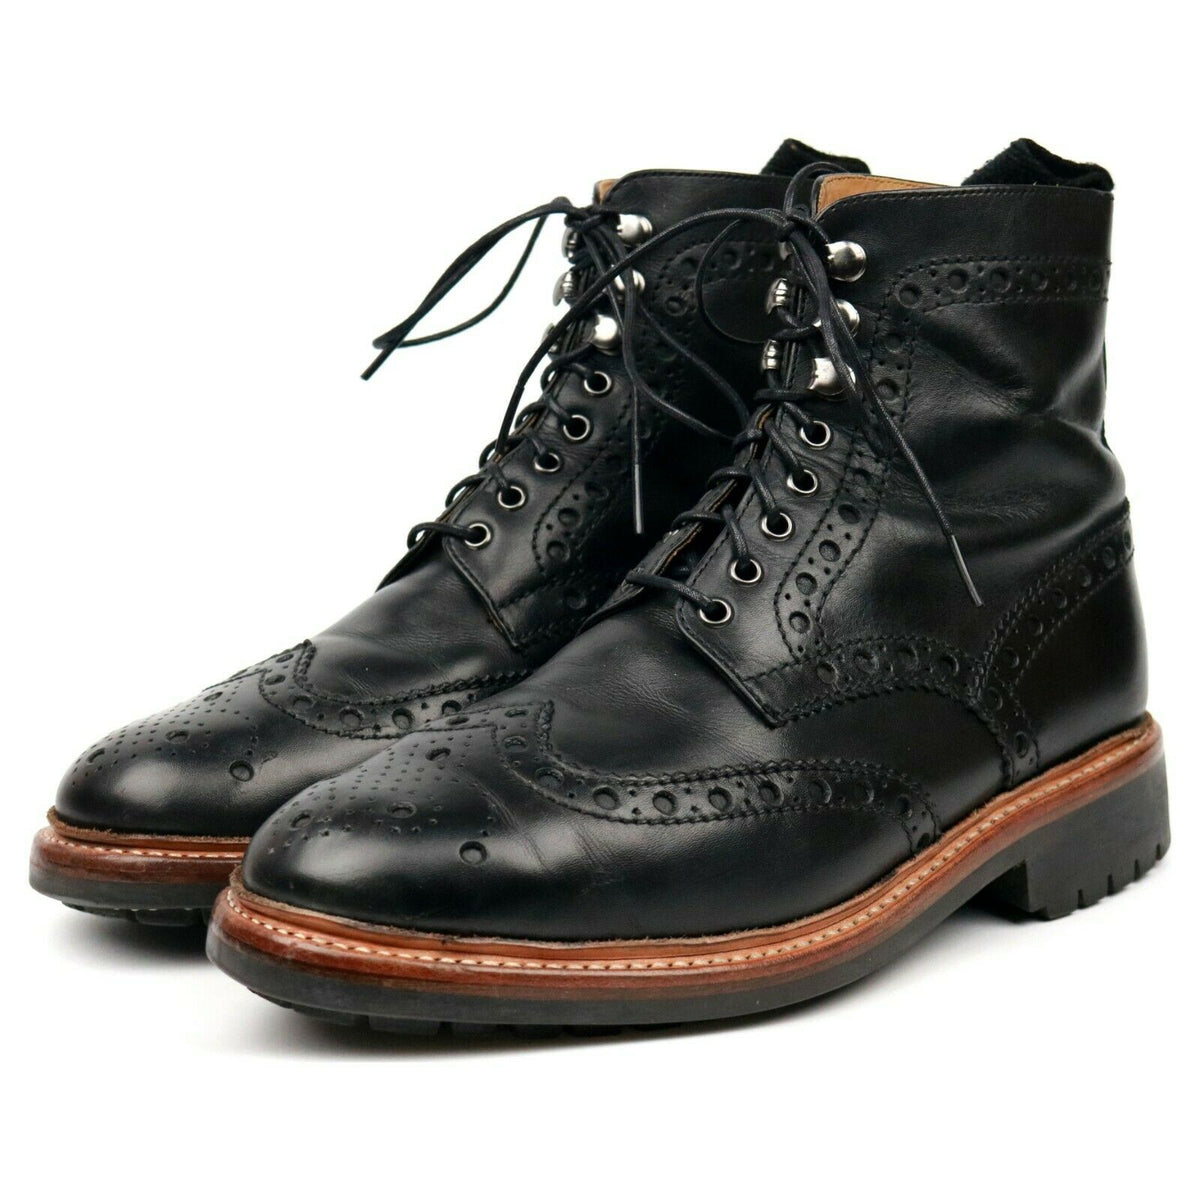 Black Leather Brogue Boots UK 6.5 G 